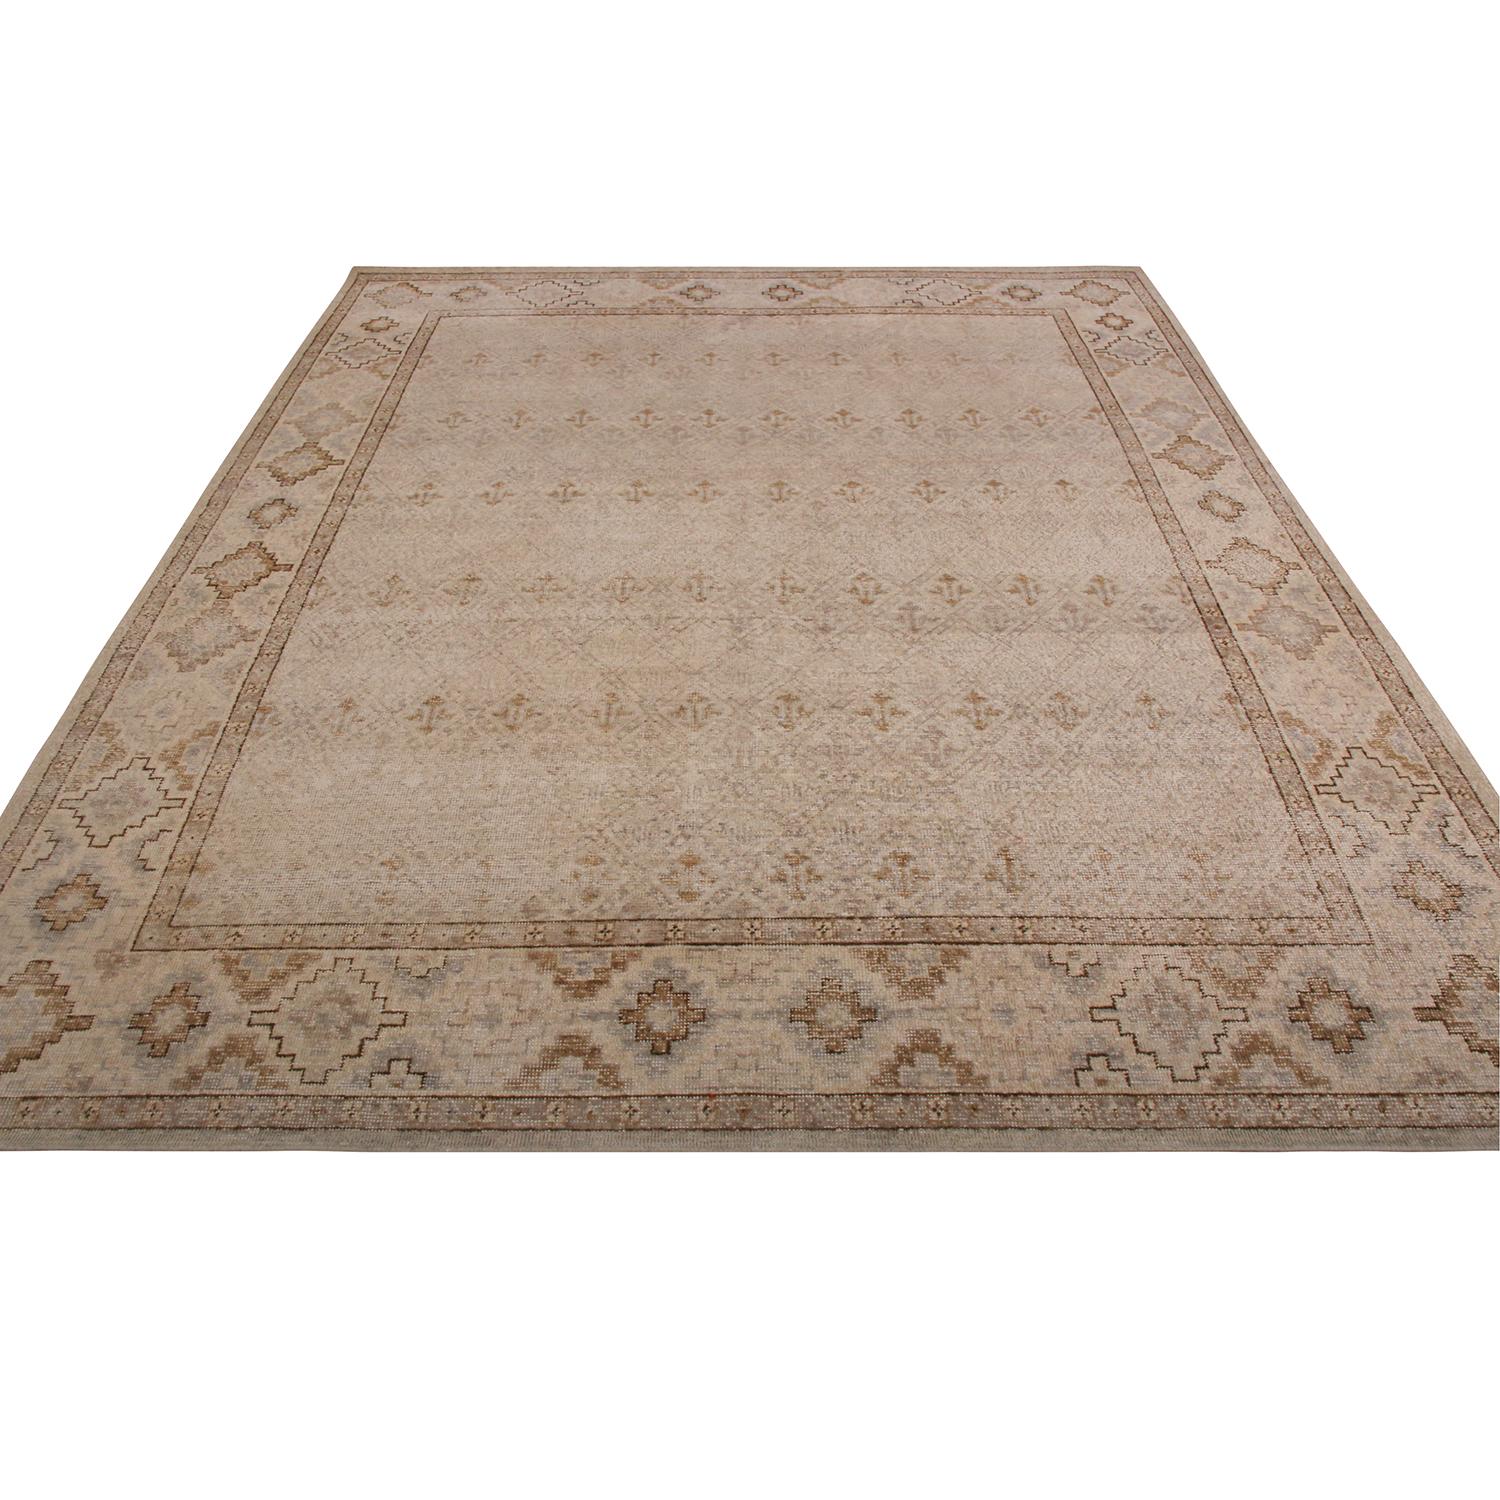 This this classically inspired geometric piece joins the latest additions to the Homage Collect by Rug & Kilim, an ambitious custom-capable approach to recapturing and reinventing an unprecedented range of international styles including Oriental